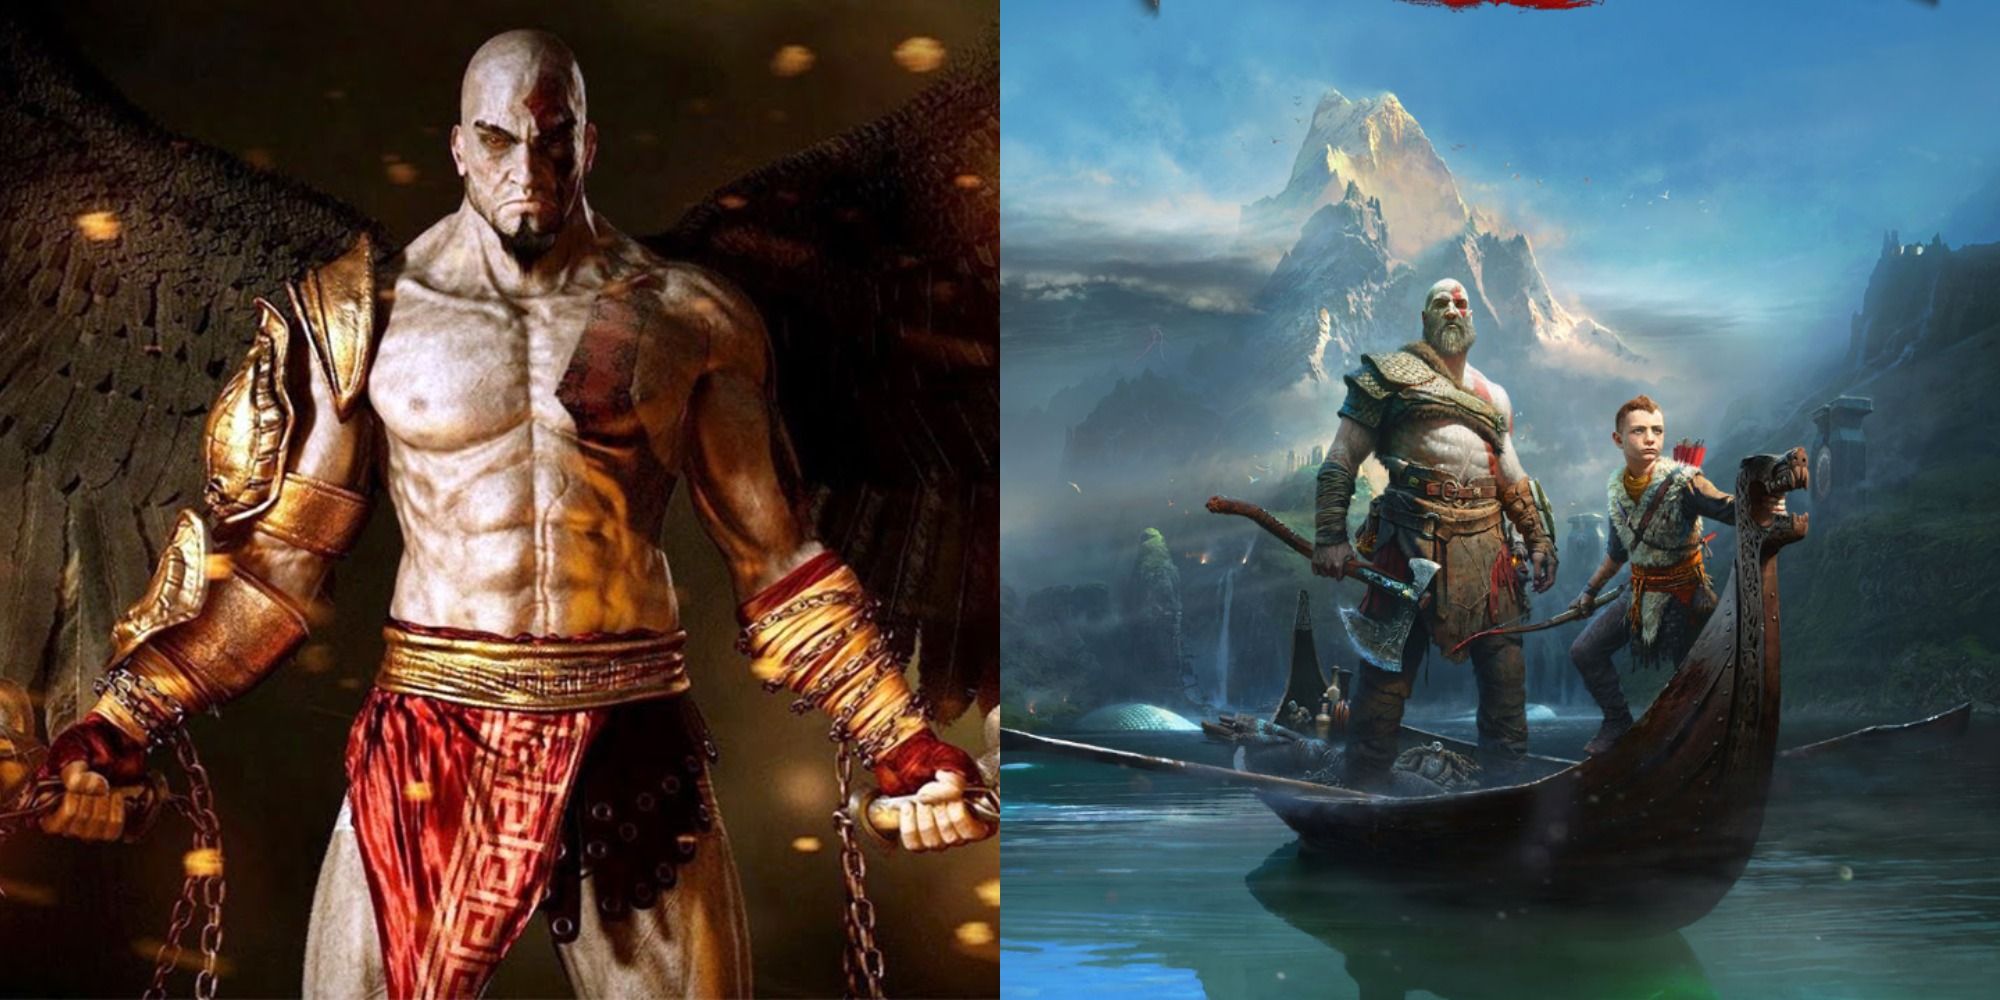 Other Characters Voiced by Kratos' Voice Actor God of War 3 Remastered and God of War 2018 Split Featured